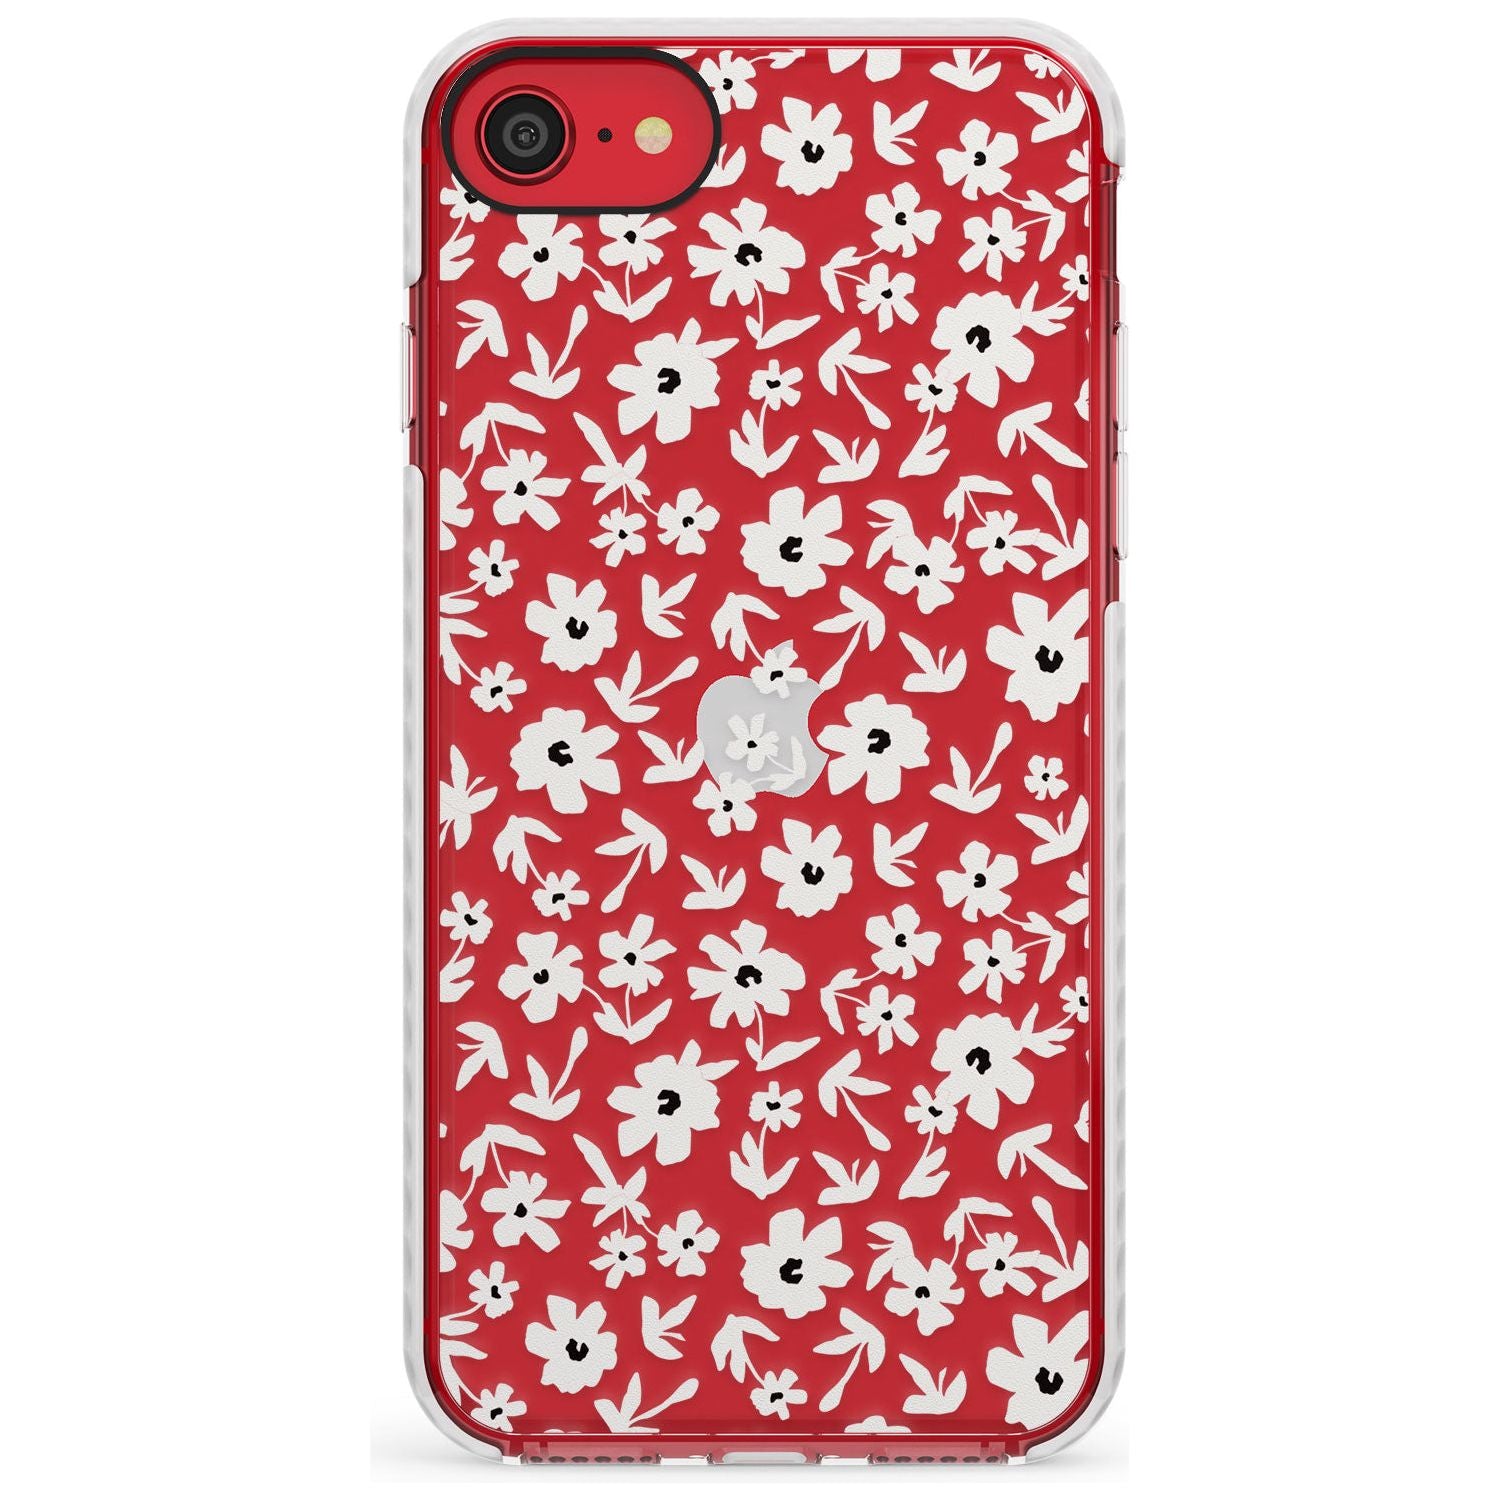 Floral Print on Clear - Cute Floral Design Slim TPU Phone Case for iPhone SE 8 7 Plus